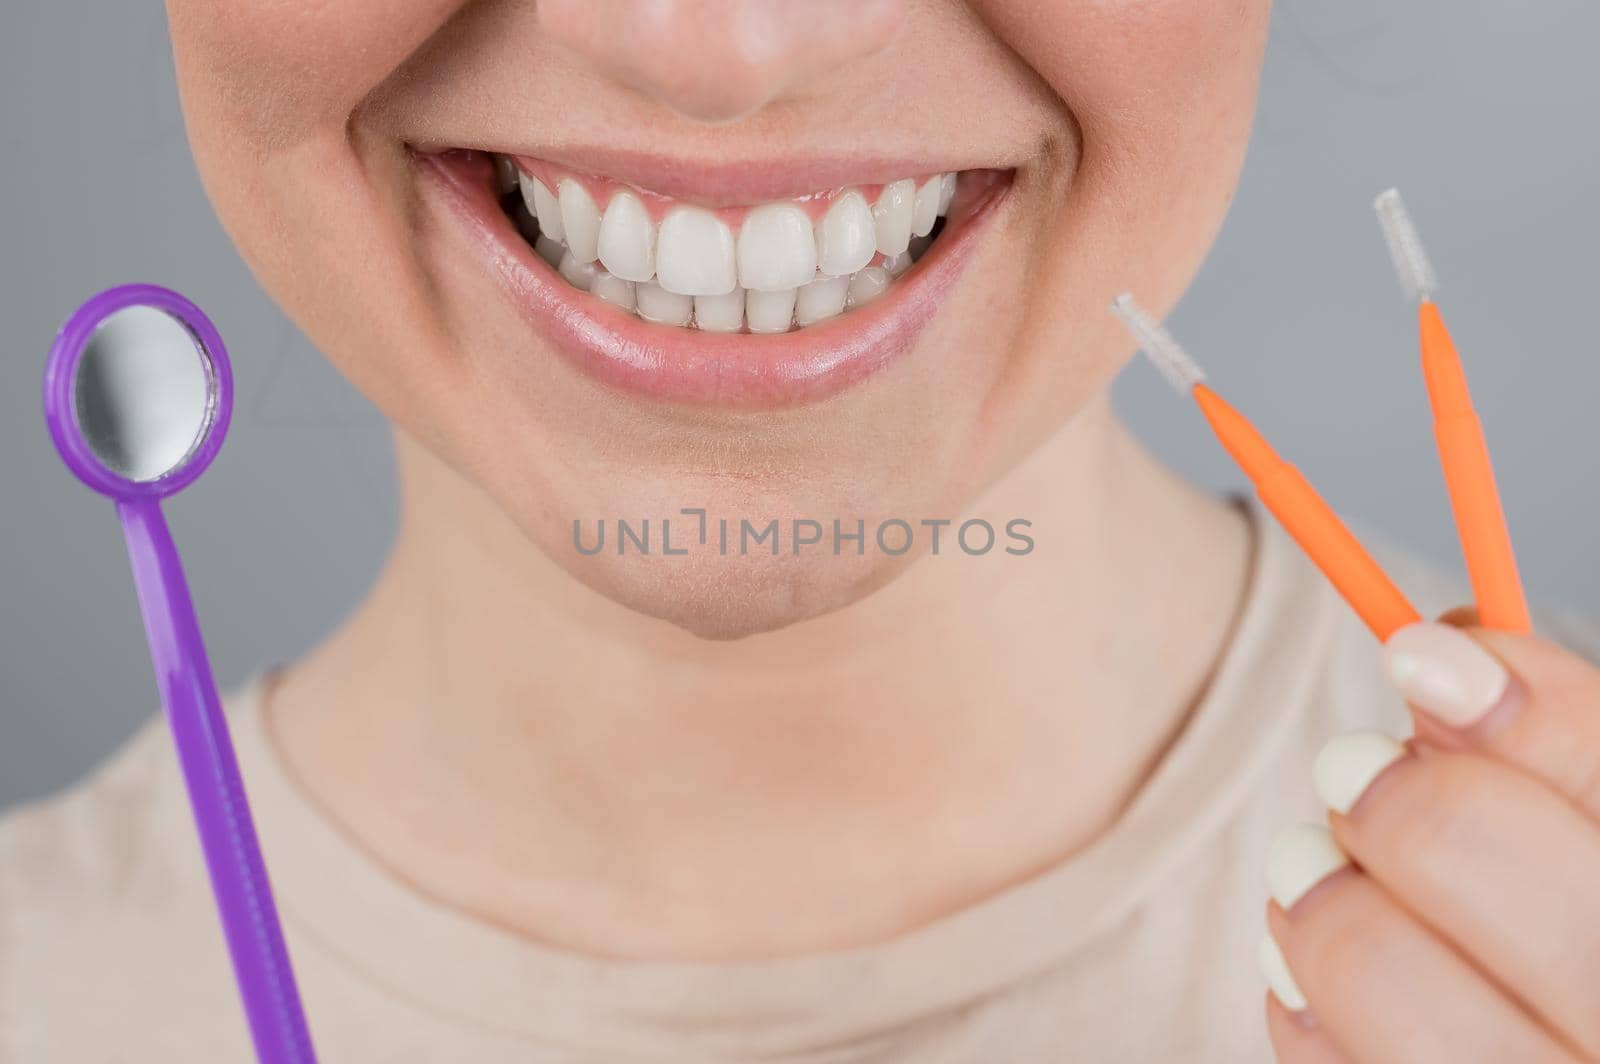 Close-up portrait of a smiling woman holding a brush and a dental mirror. Widescreen by mrwed54